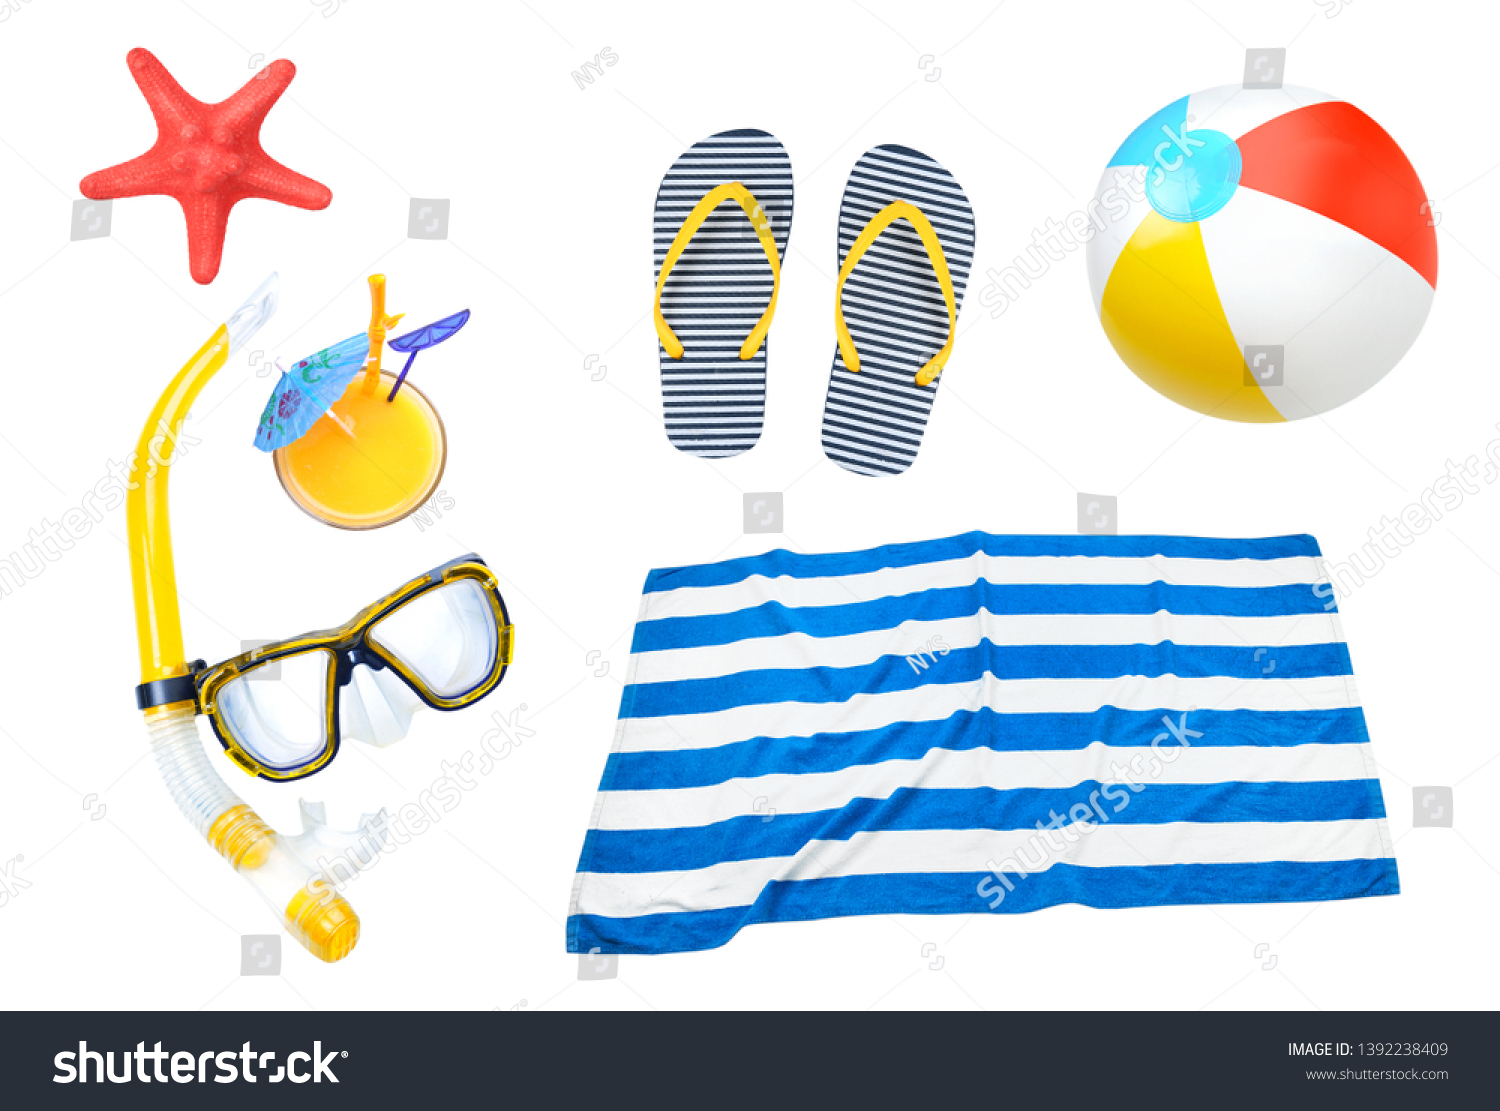 Summer objects collage,beach items set isolated. Holiday vocation symbol.
